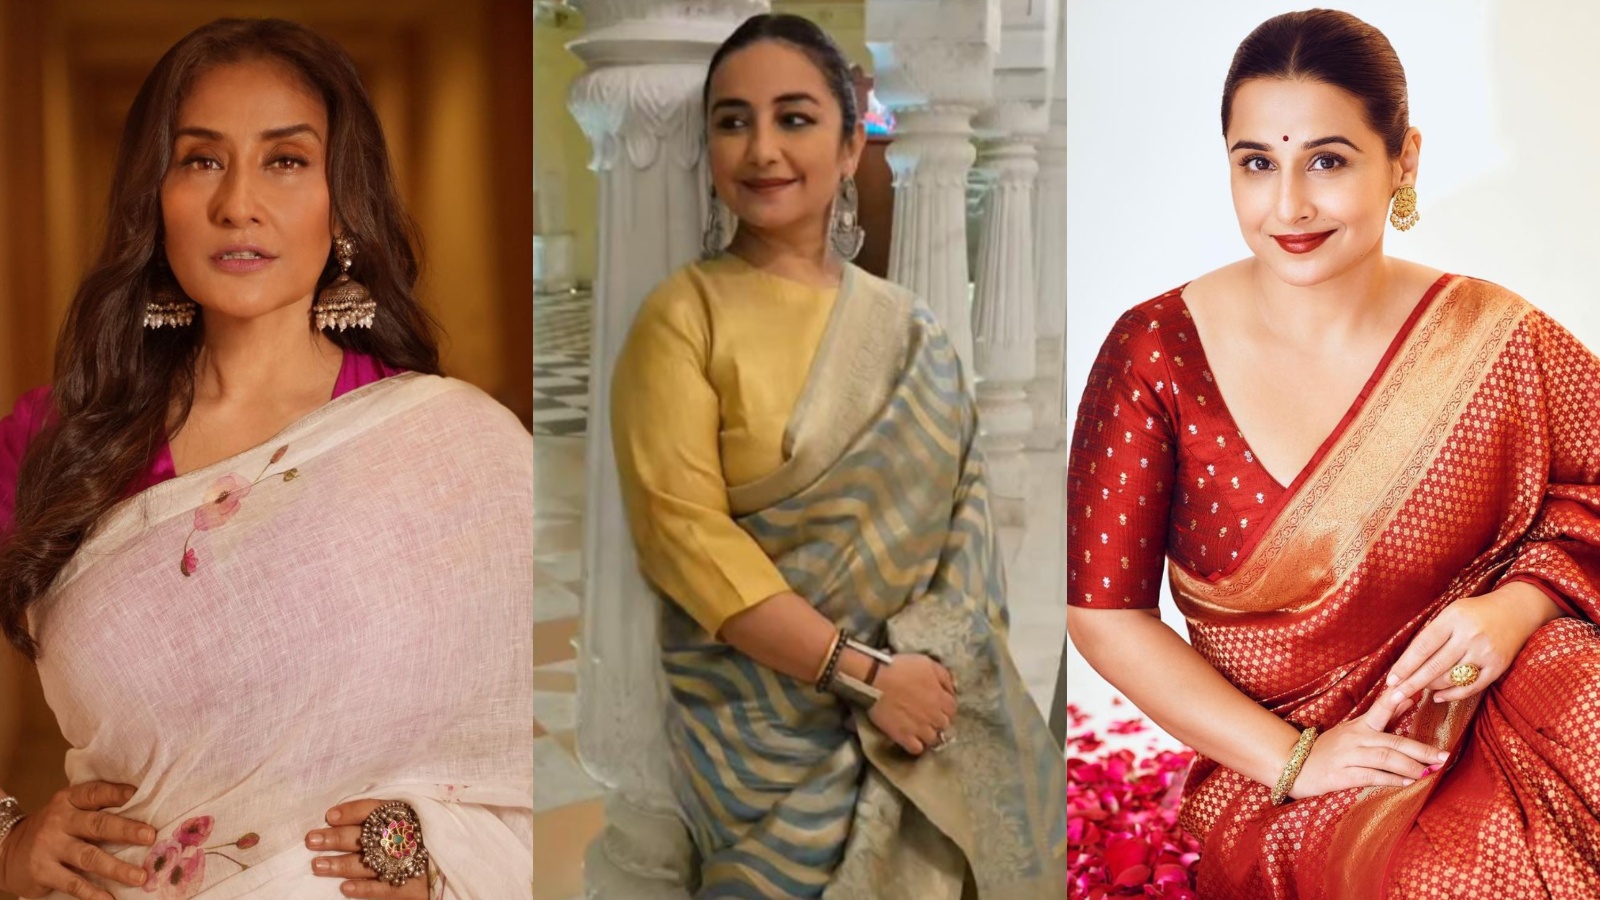 Divya Dutta Sex - Divya Dutta says 90s was a 'confusing' time in her career, people would say  she 'looks like Manisha Koirala': 'Now they ask if I'm Vidya Balan's  sister' | Bollywood News - The